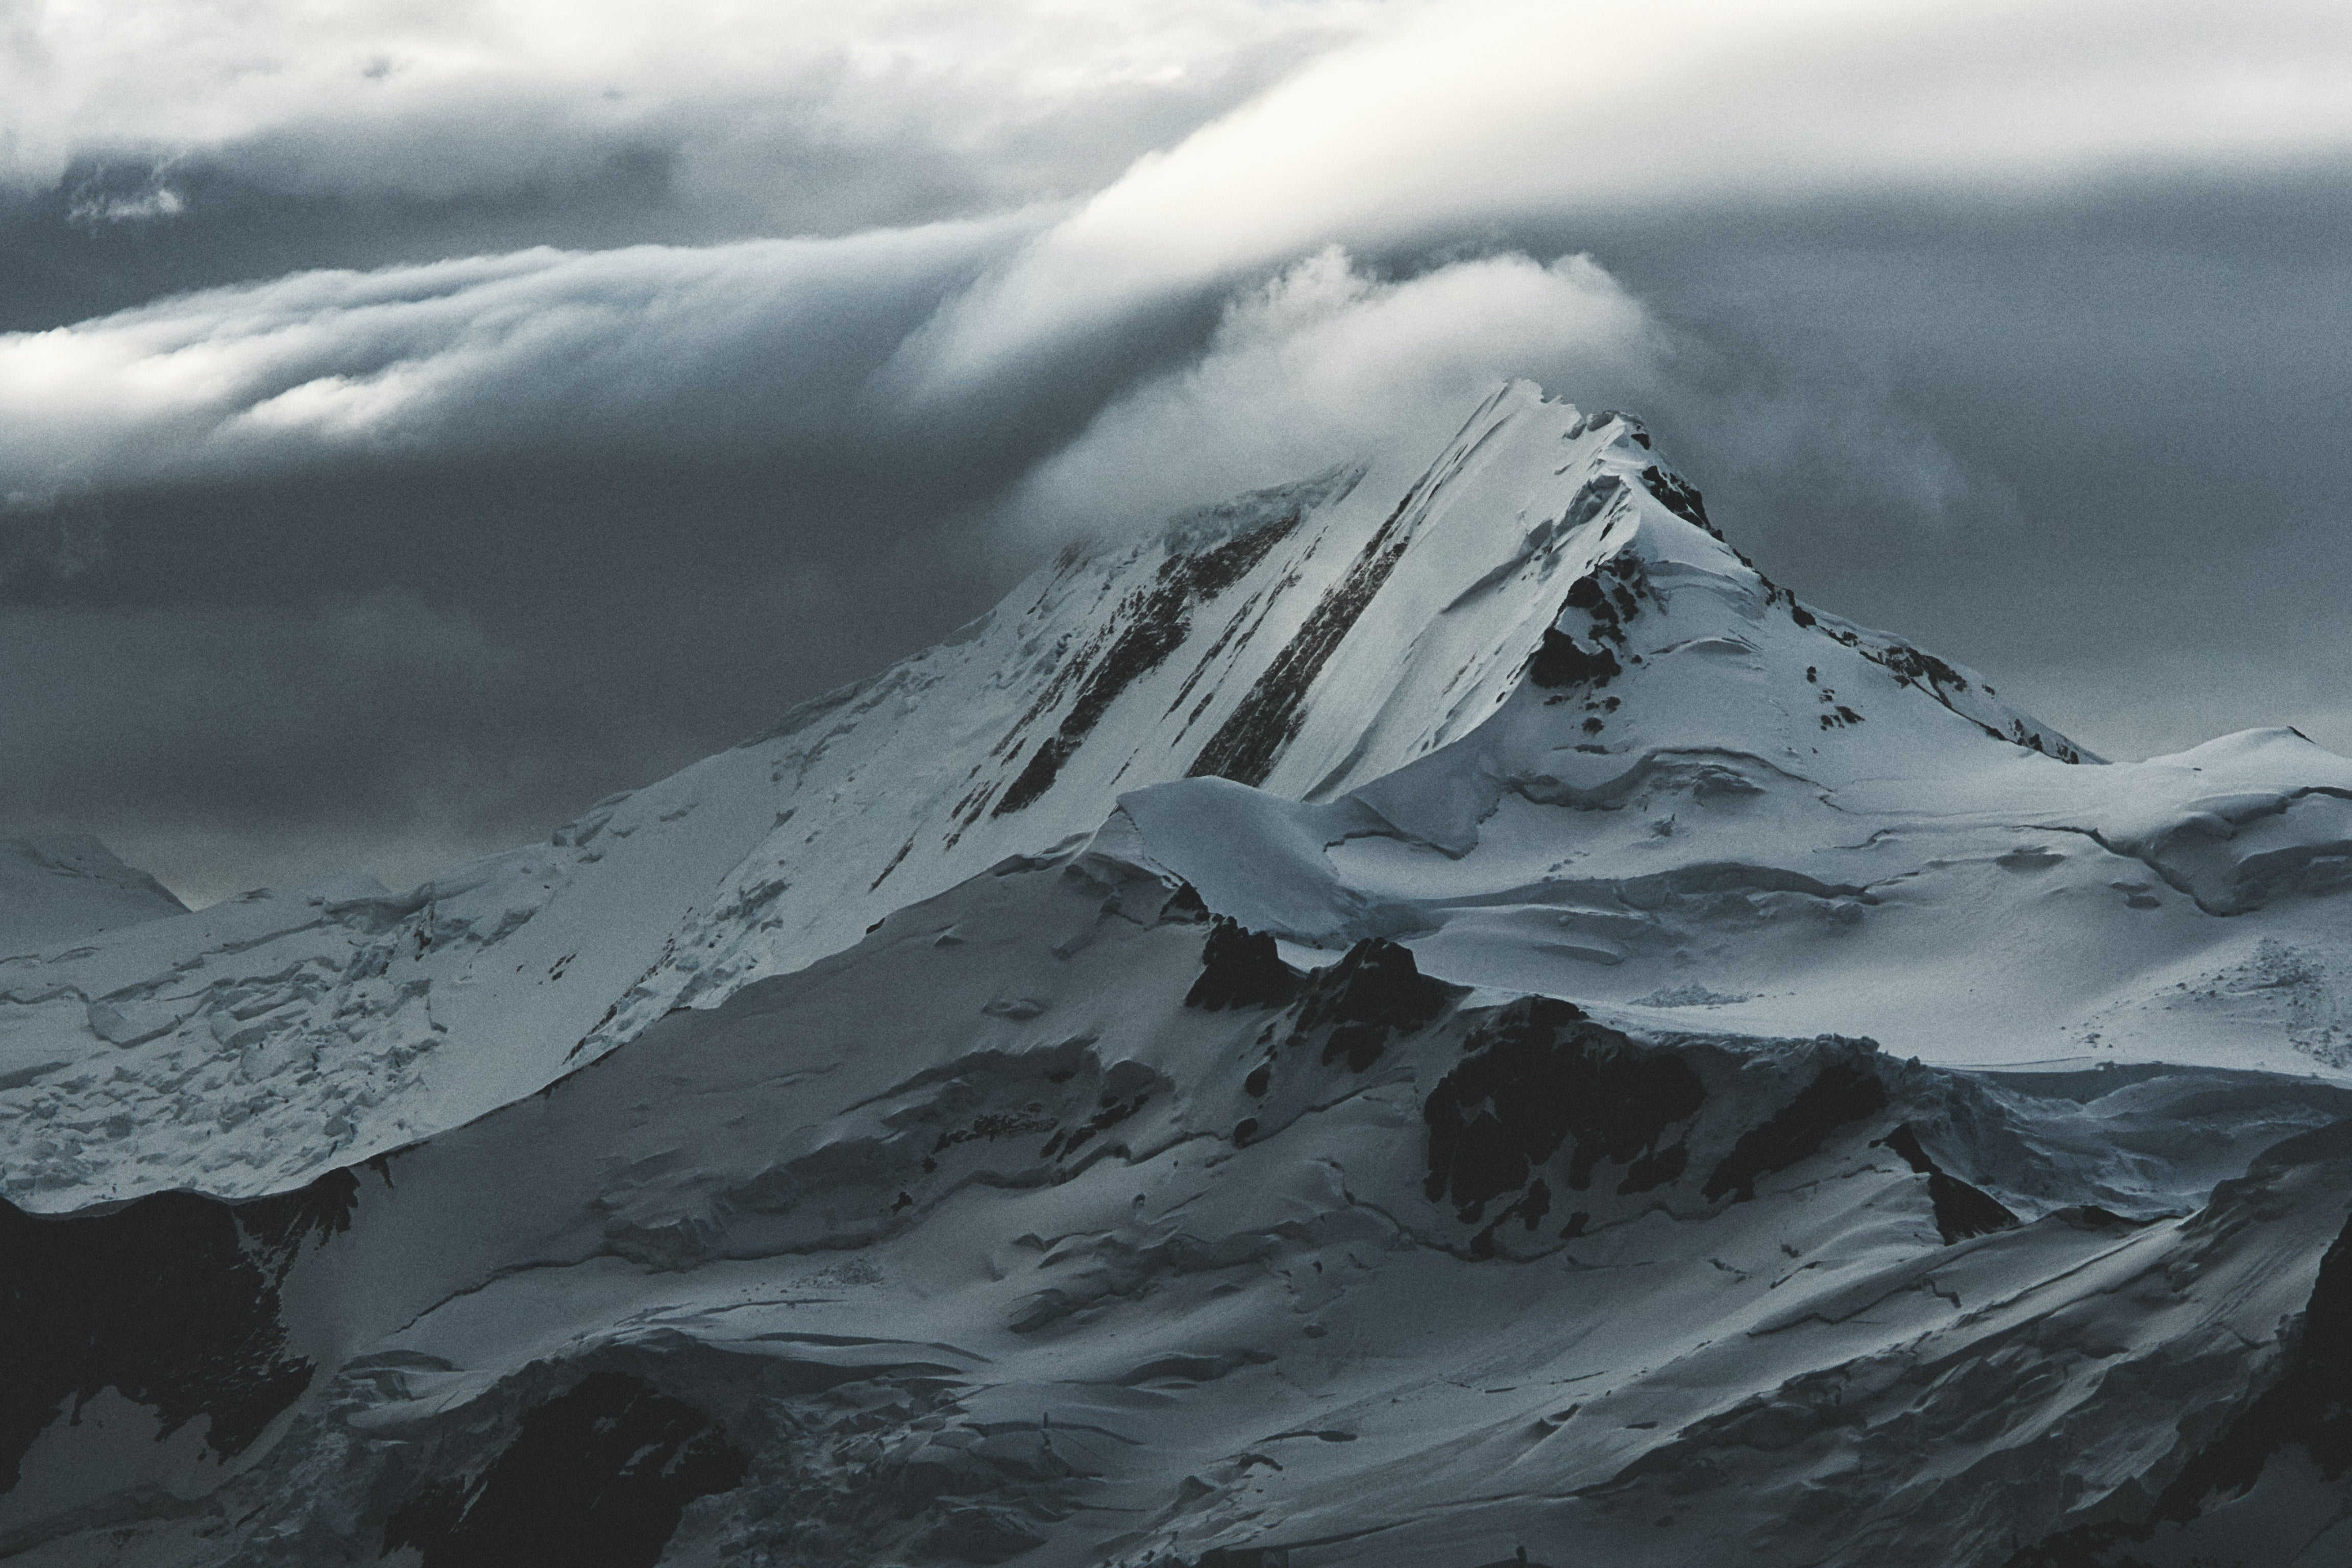 A snow-covered mountain under cloudy skies.